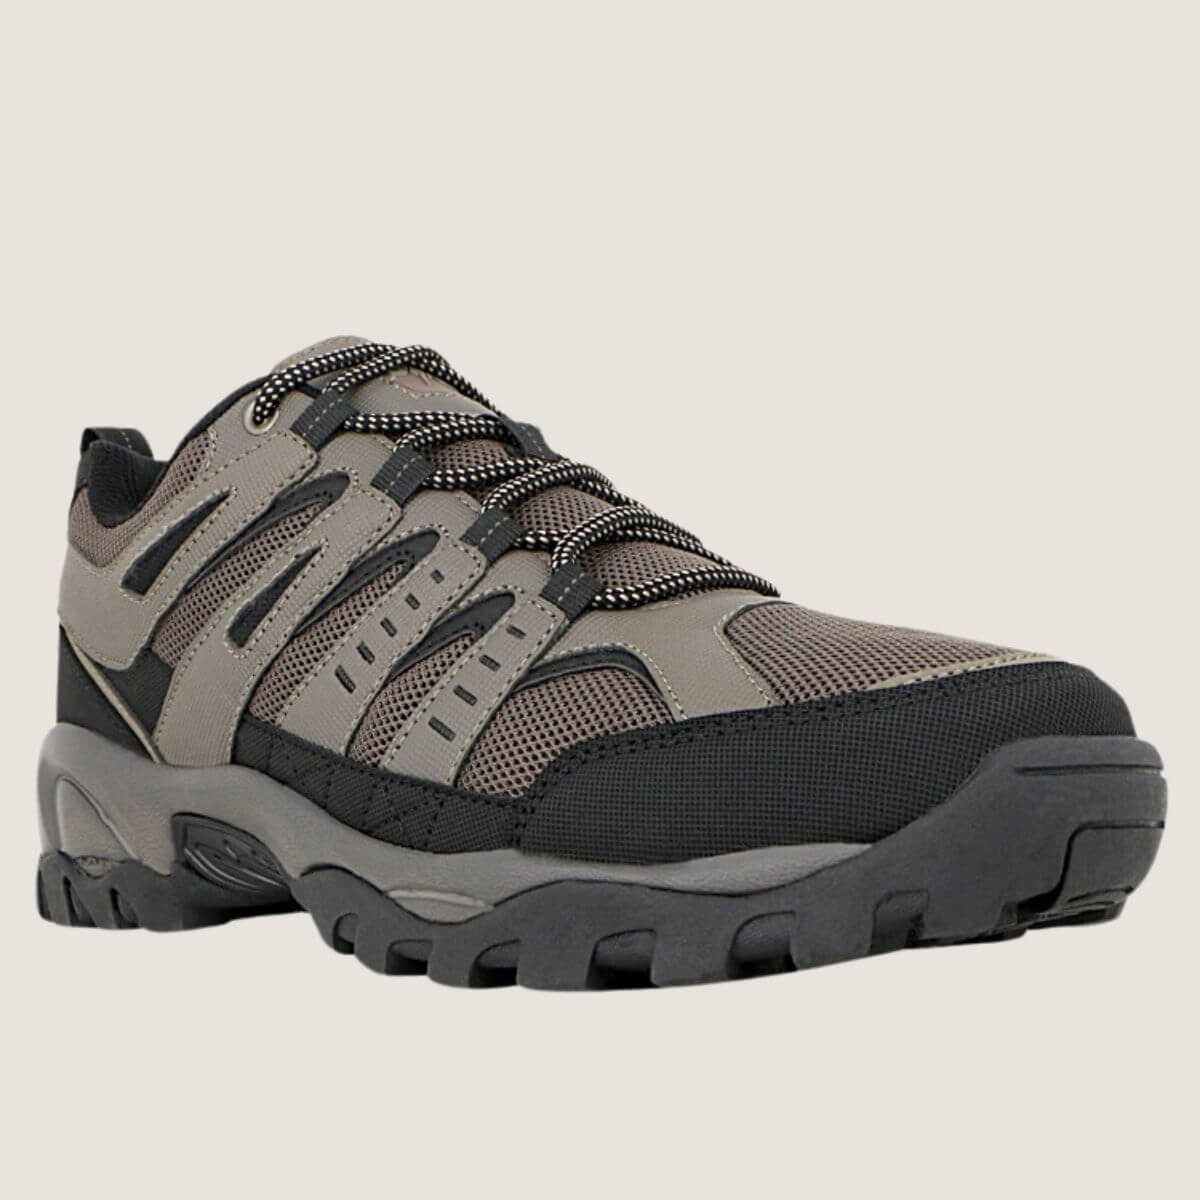 Bolt Agra Lace Up Hiker